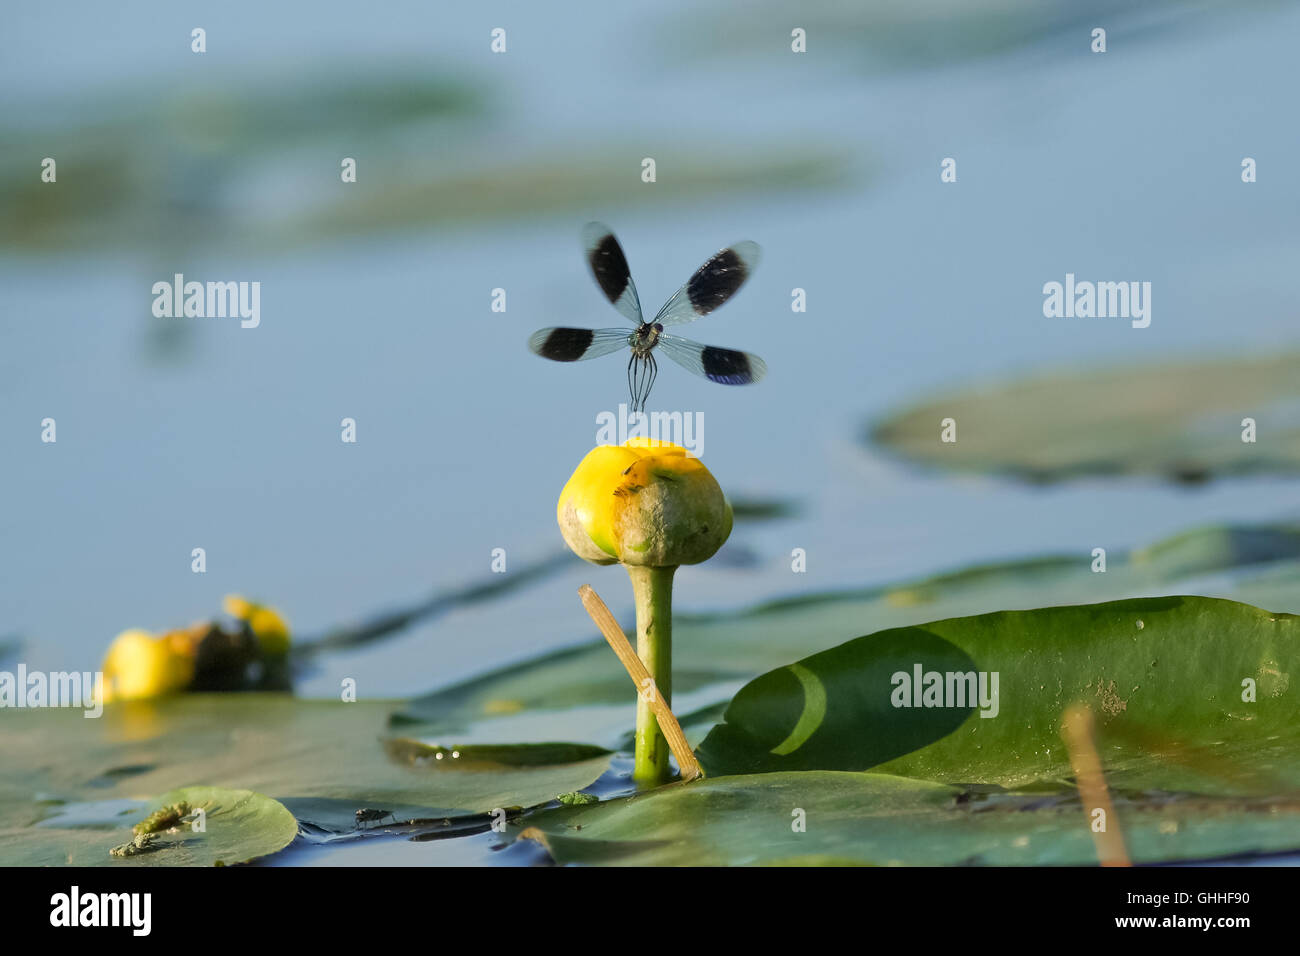 Male Banded Demoiselle damselfly(Calopteryx splendens) taking off from a lillypad flower Stock Photo